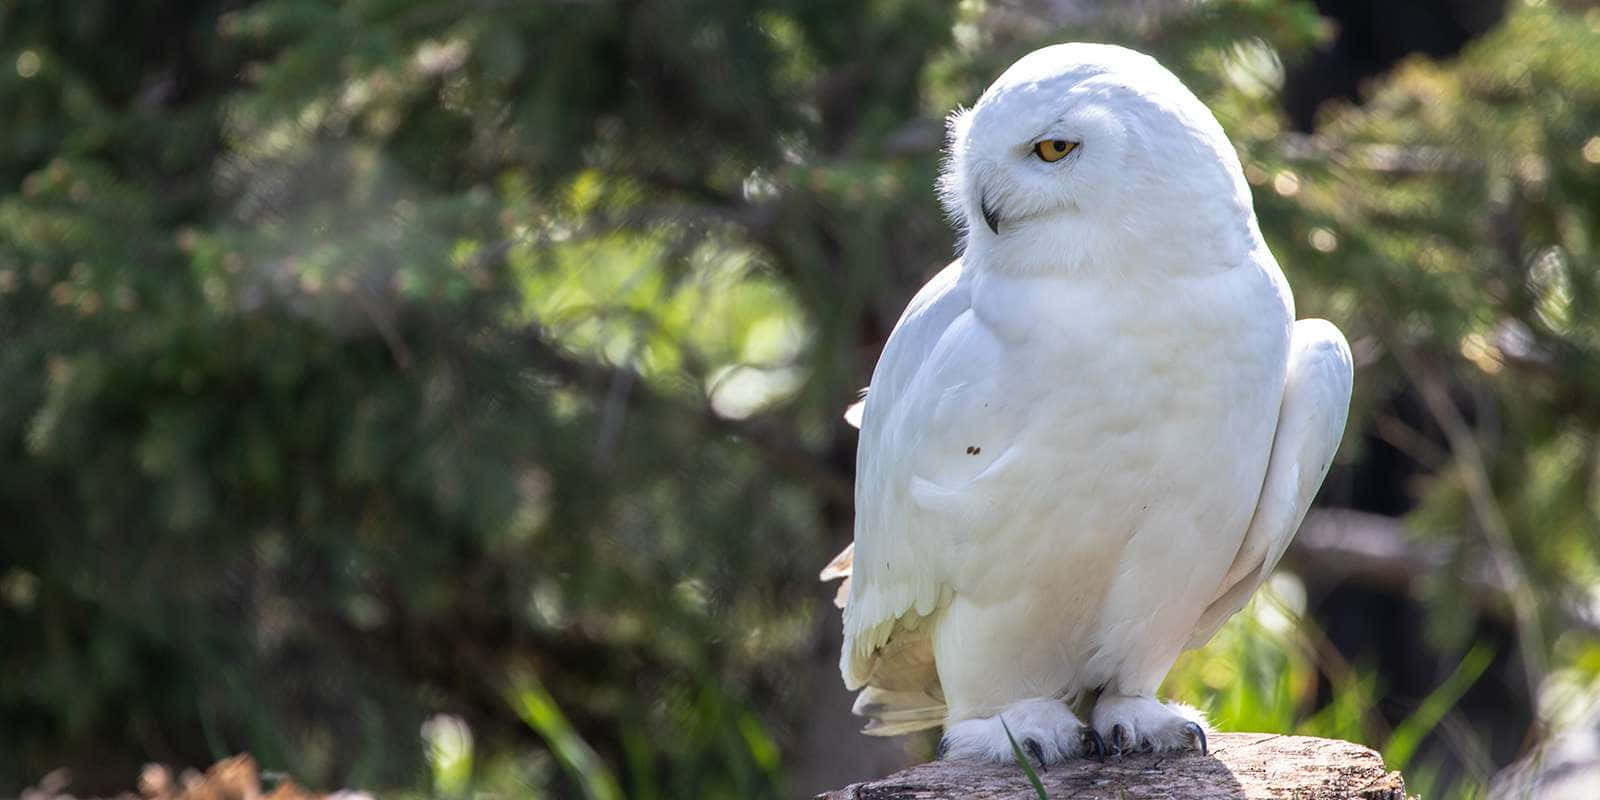 Snowy Owl - A White Owl Perched On A Rock